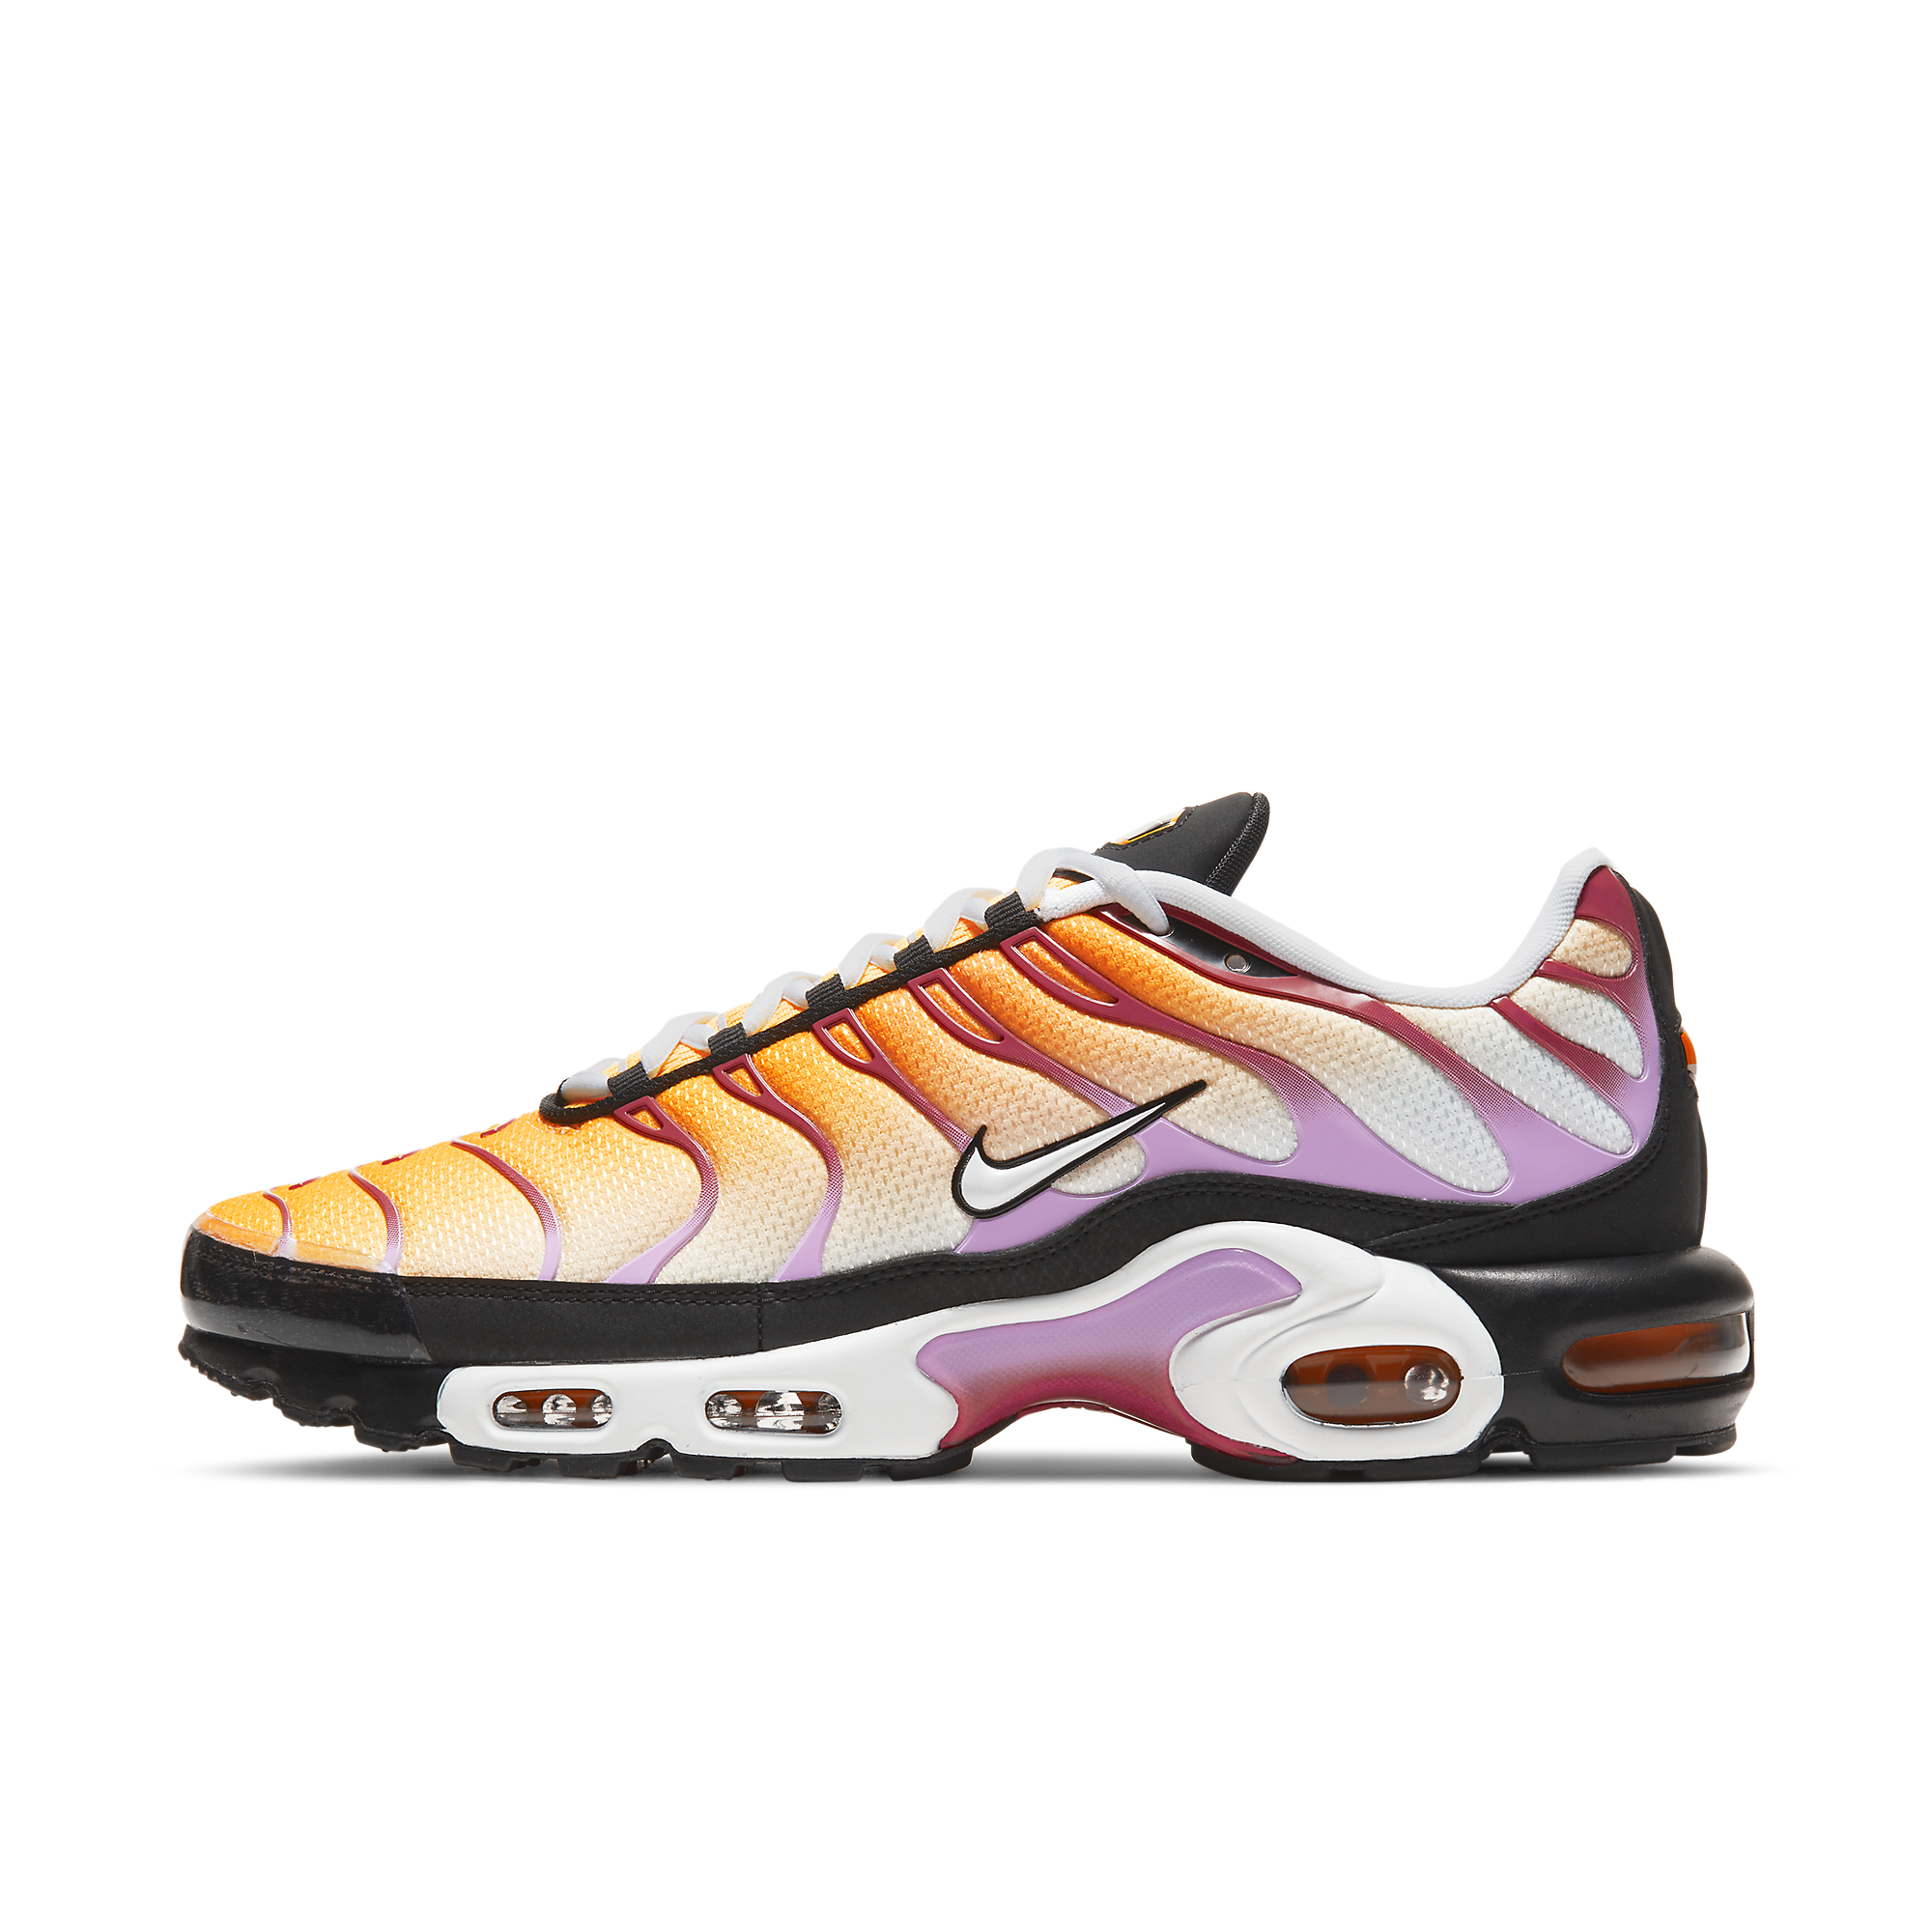 Nike Air Max Plus Colors | vlr.eng.br